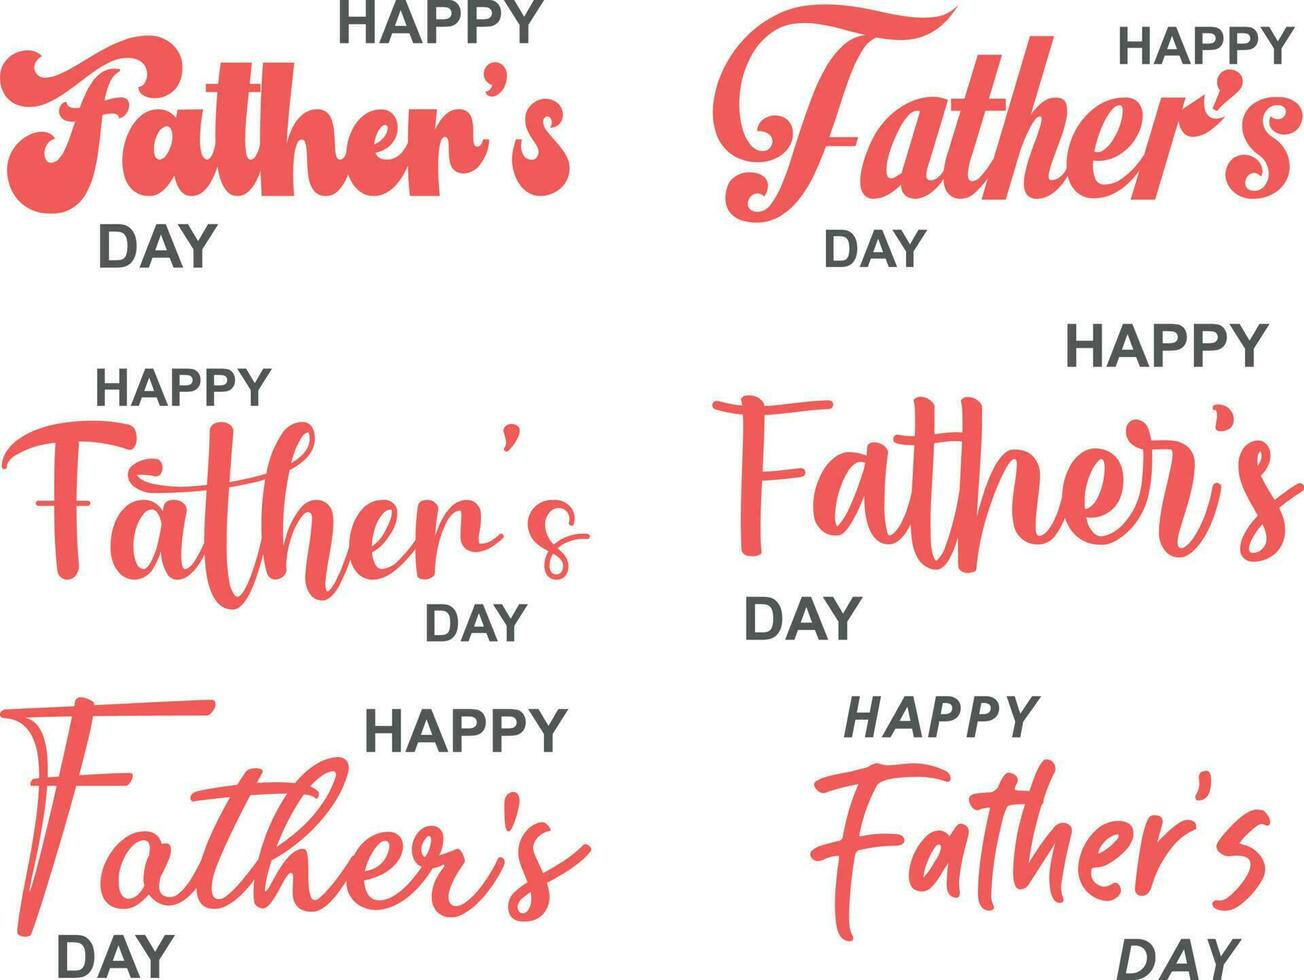 Set of happy father's day logo signs. Vector illustration . Father's Day